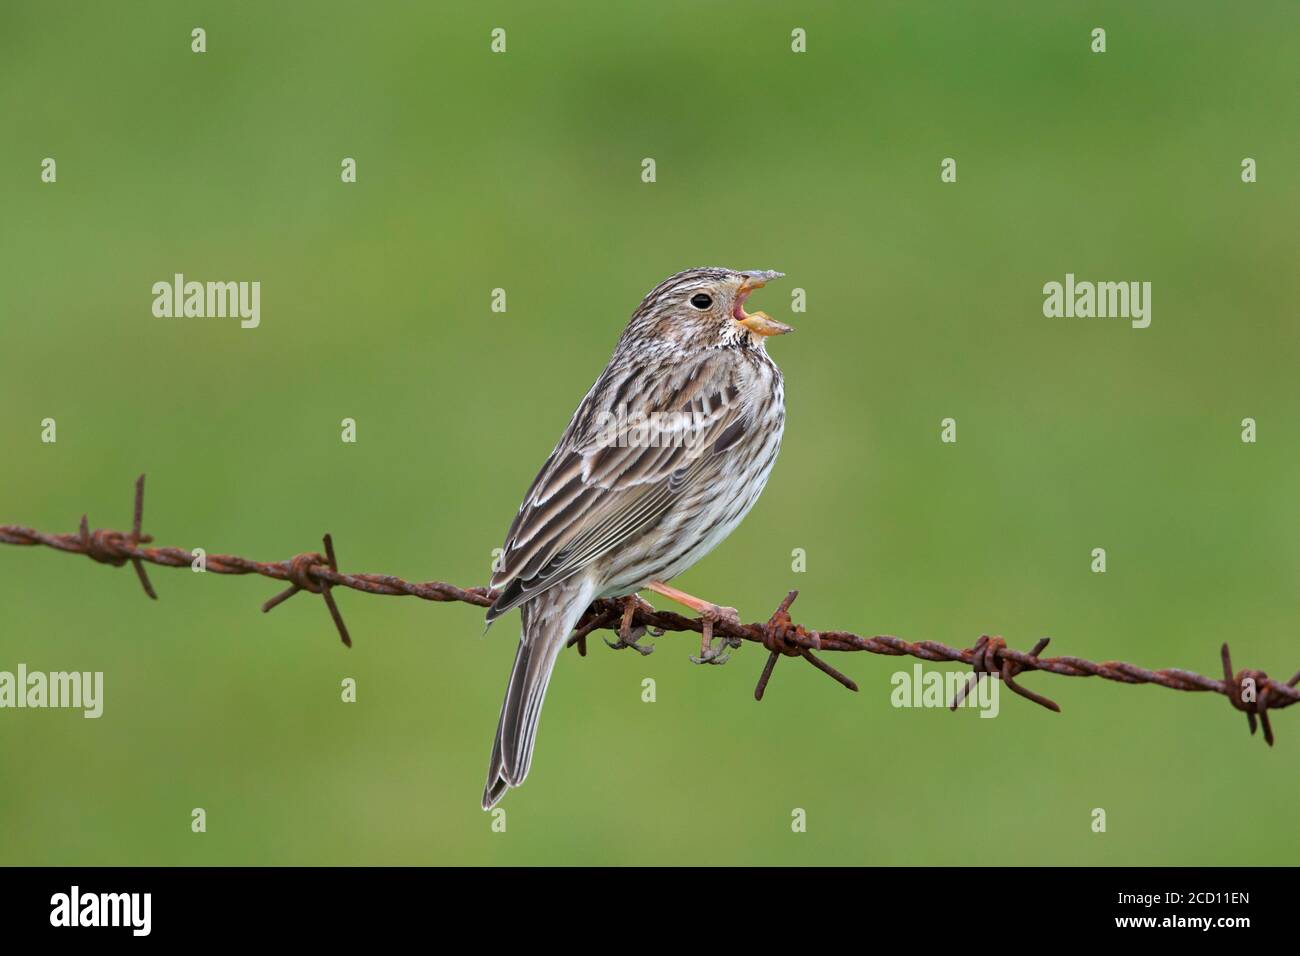 Corn bunting (Emberiza calandra / Miliaria calandra) singing from barbwire / barbed wire along meadow / field in spring Stock Photo